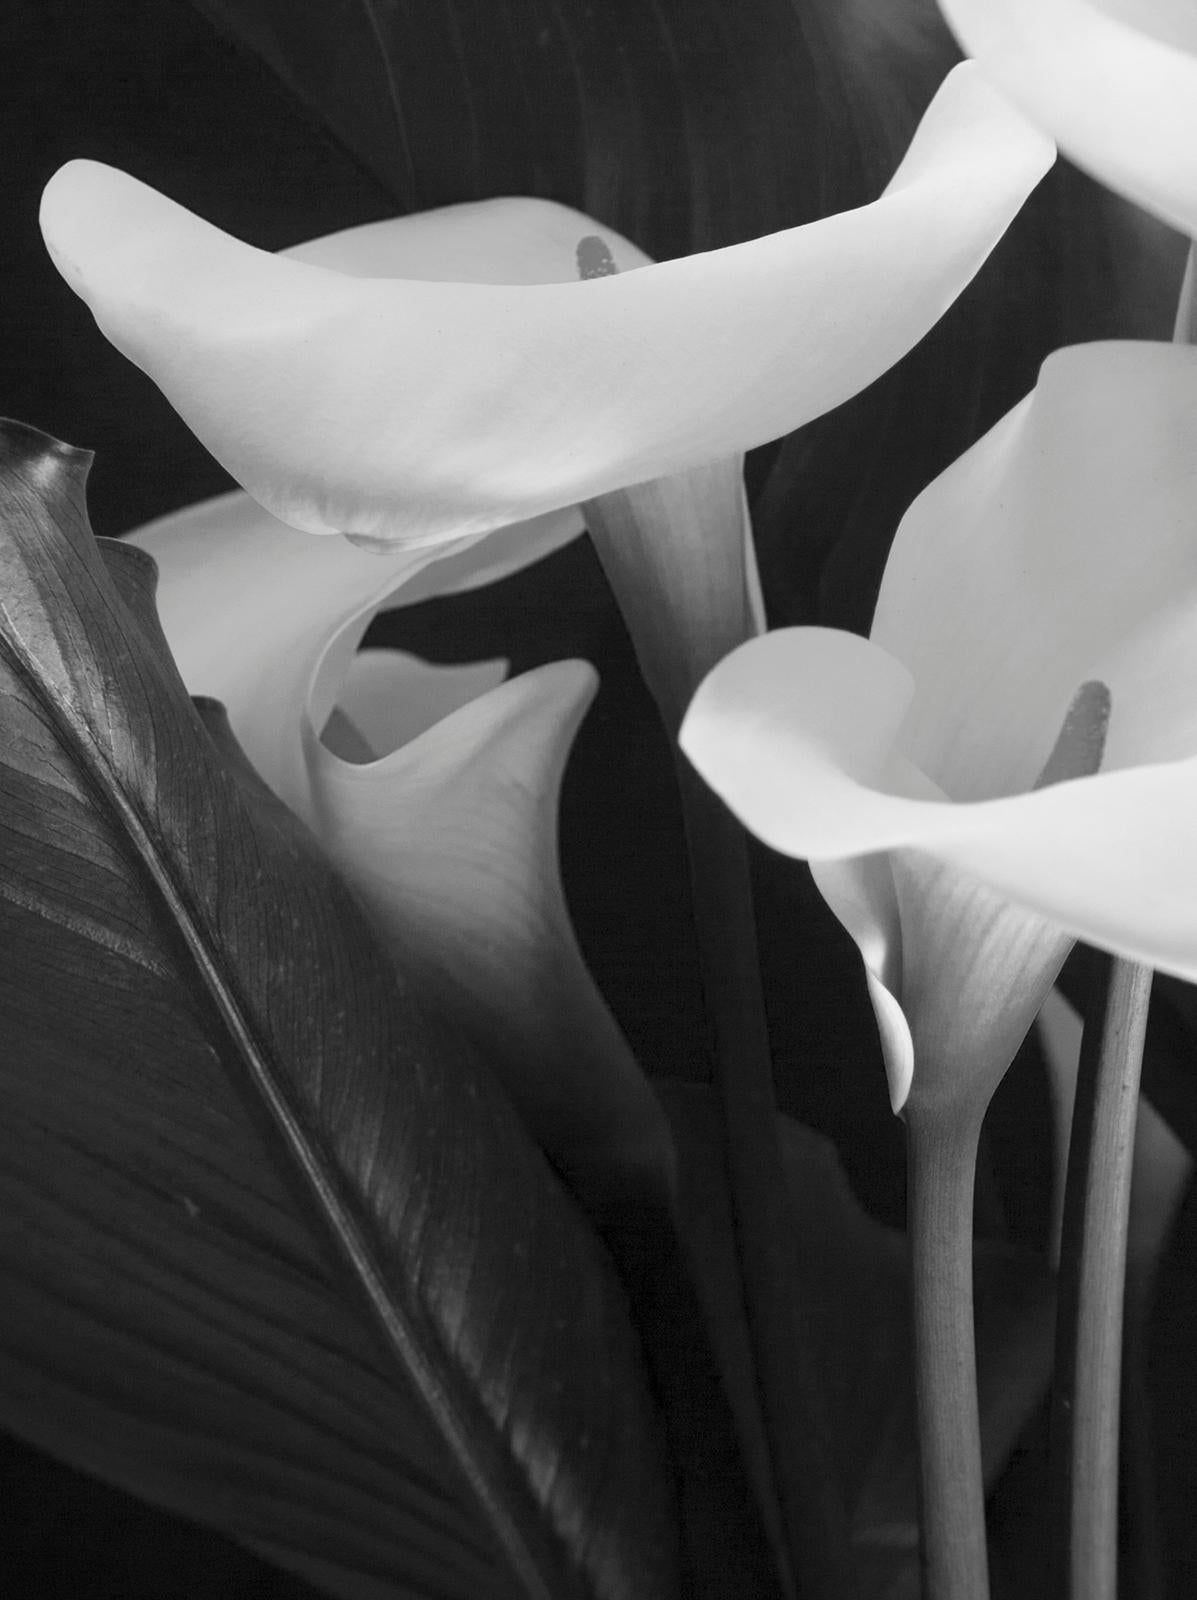 Arum Lilies -Signed limited edition fine art print, Black and white, Oversize - Photograph by Ian Sanderson